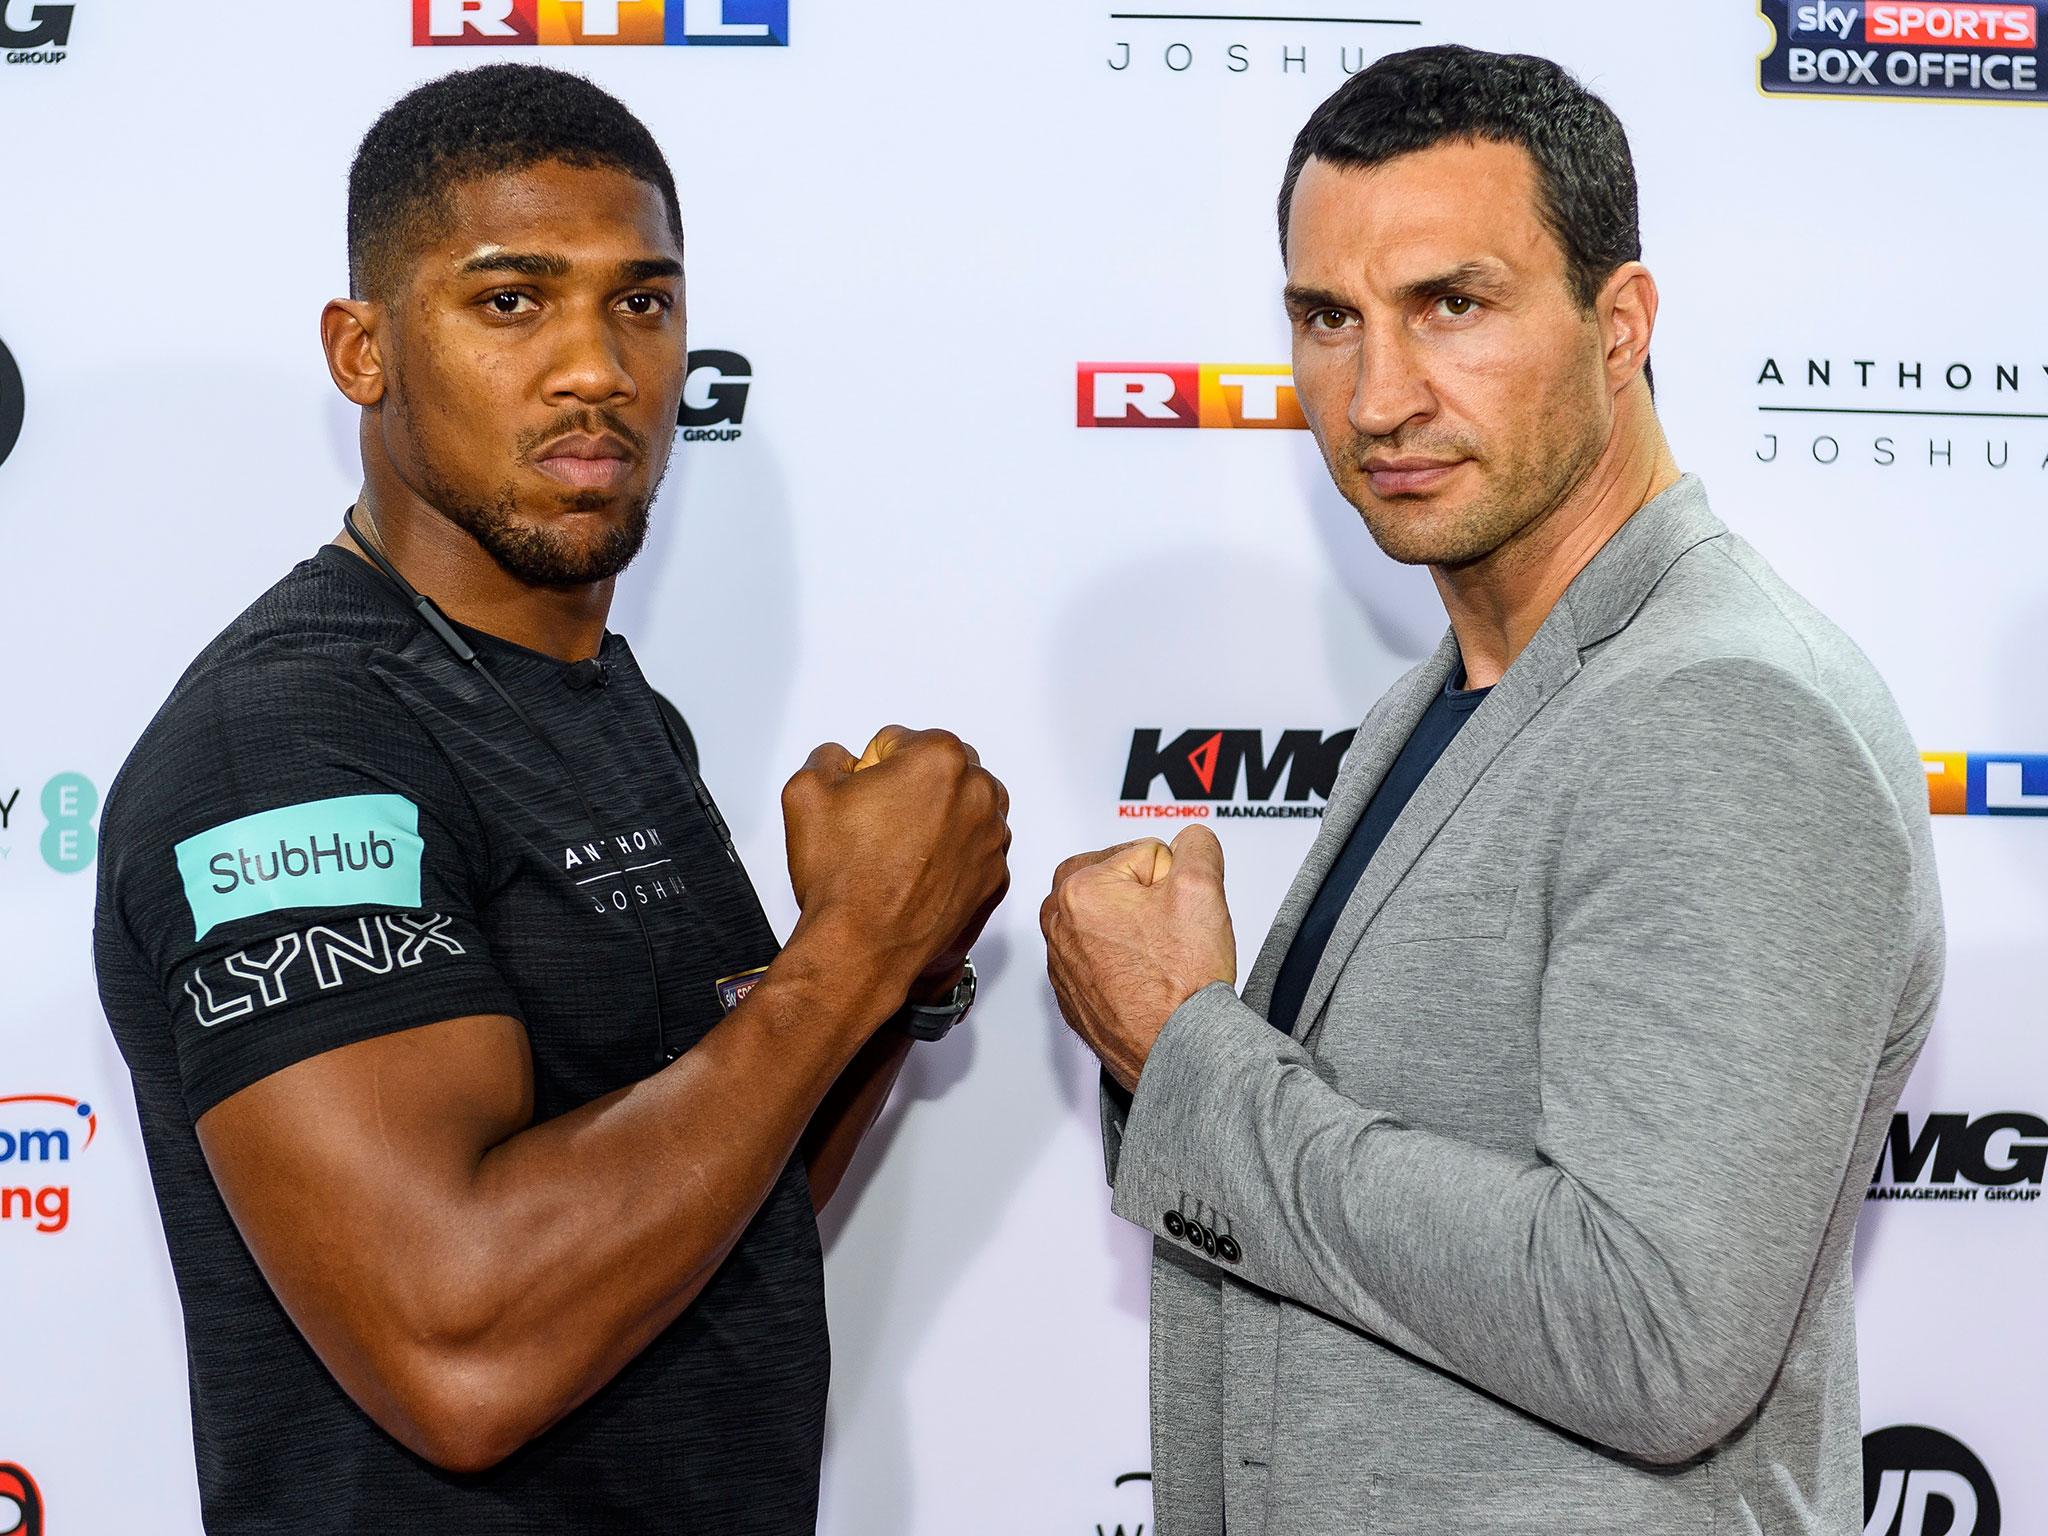 Froch expects Klitschko to bring his absolute best when he faces Joshua